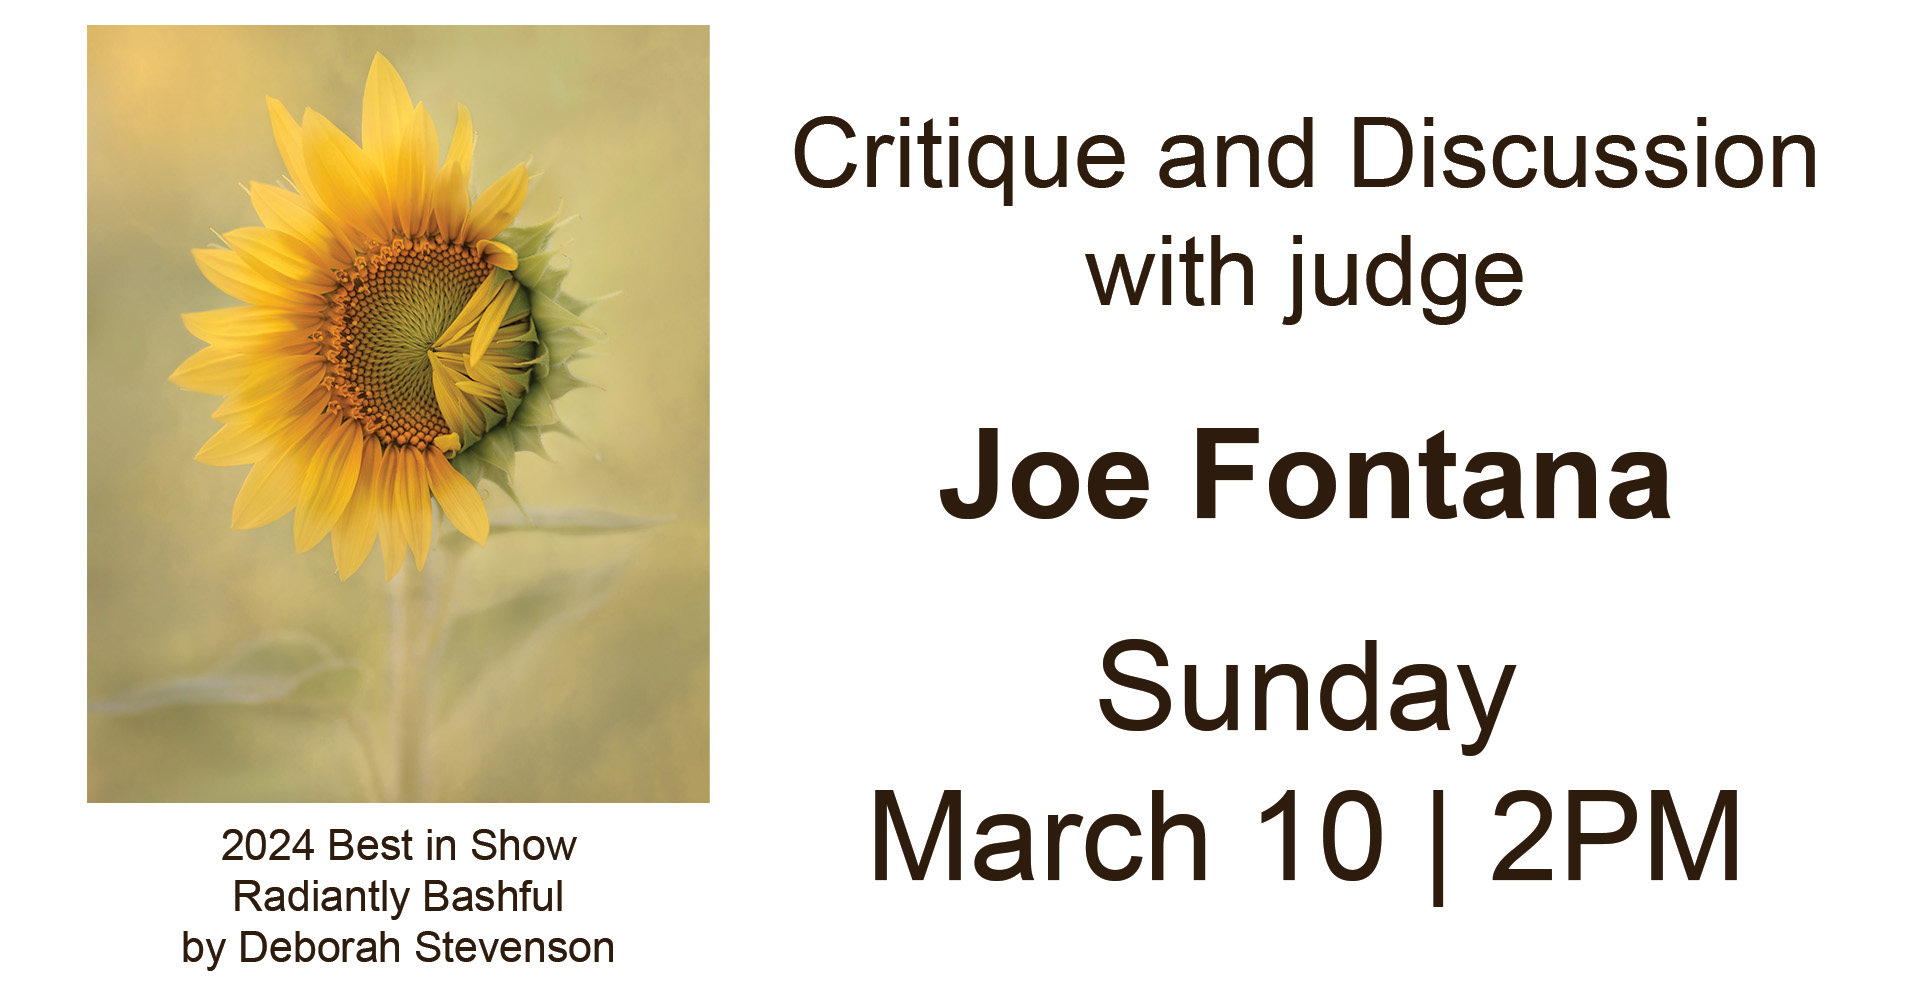 A picture of a Sunflower on the left, only half open with the text underneath reading "2024 Best in Show Radiantly Bashful by Deborah Stevenson". The right has text that reads "Critique and Discussion with judge Joe Fontana Sunday March 10 2PM" 